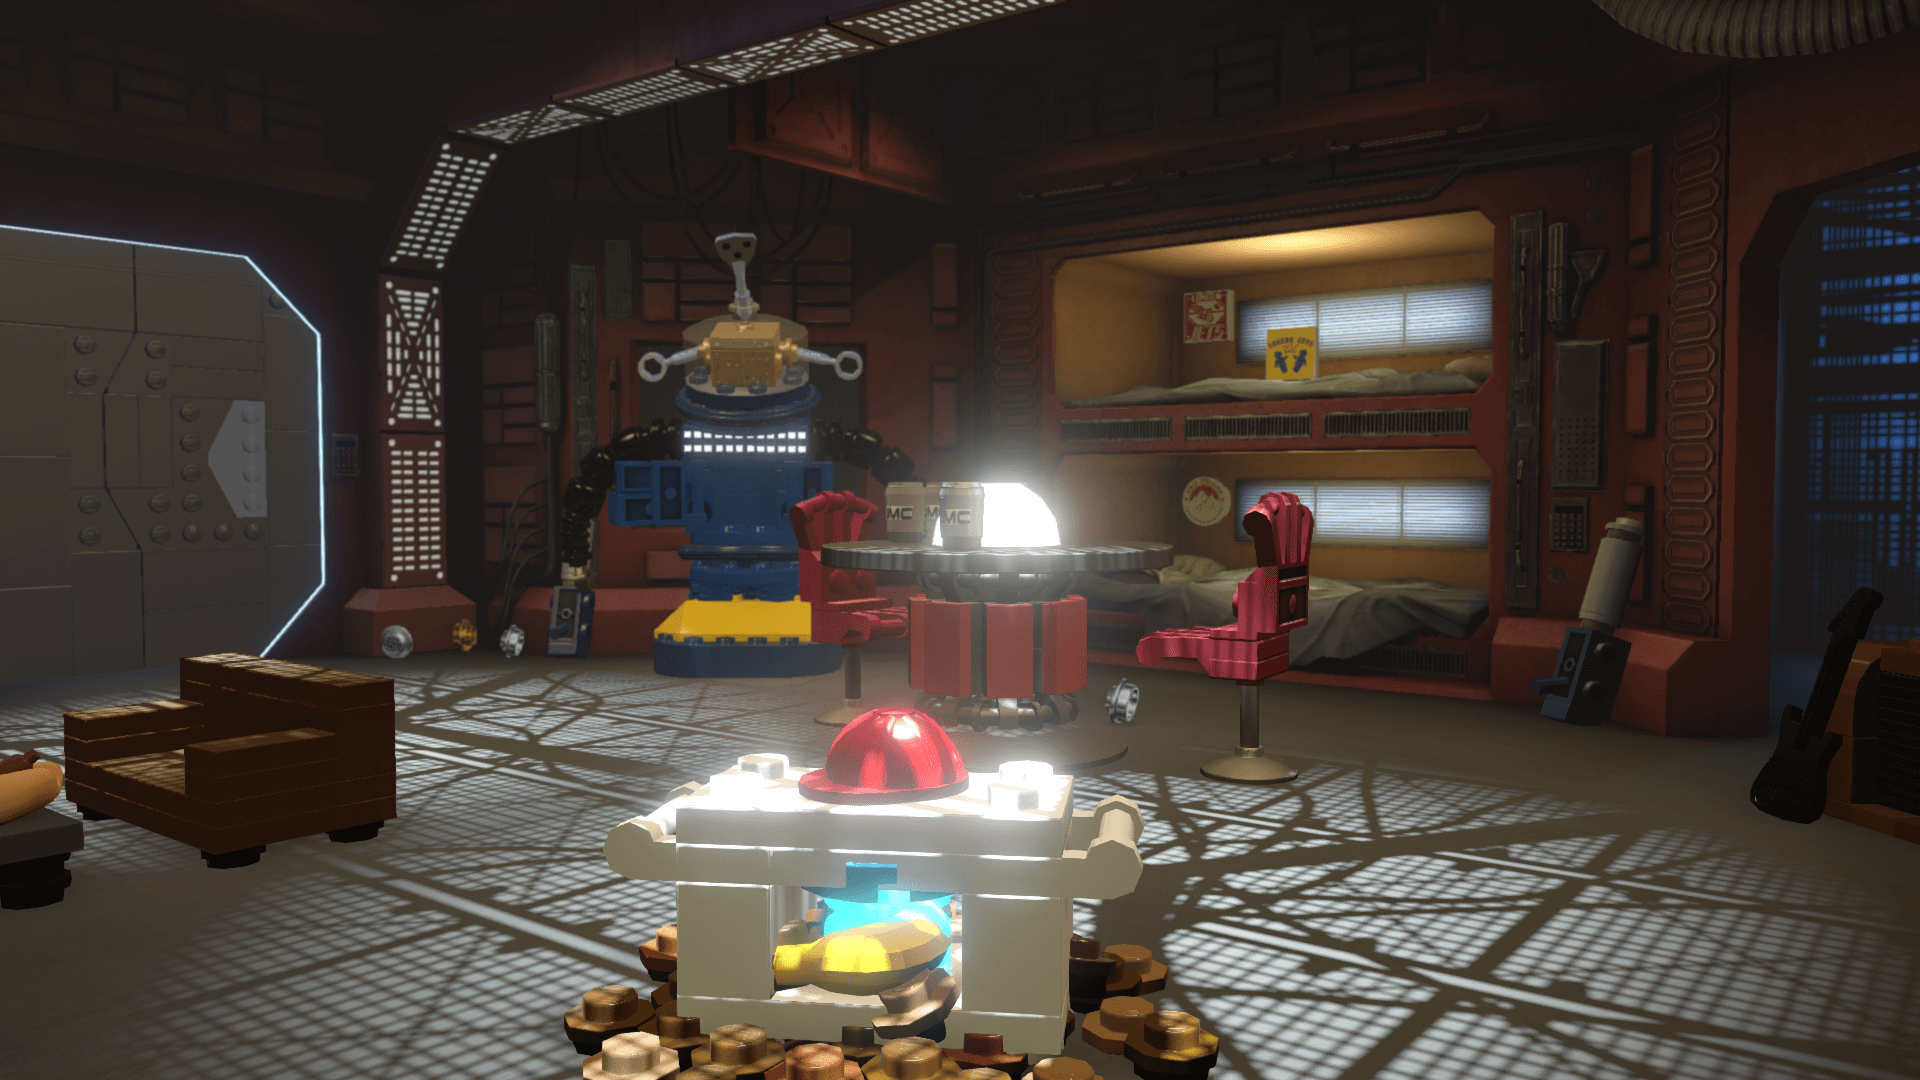 A Red Dwarf Free Play room created in Lego Dimensions.